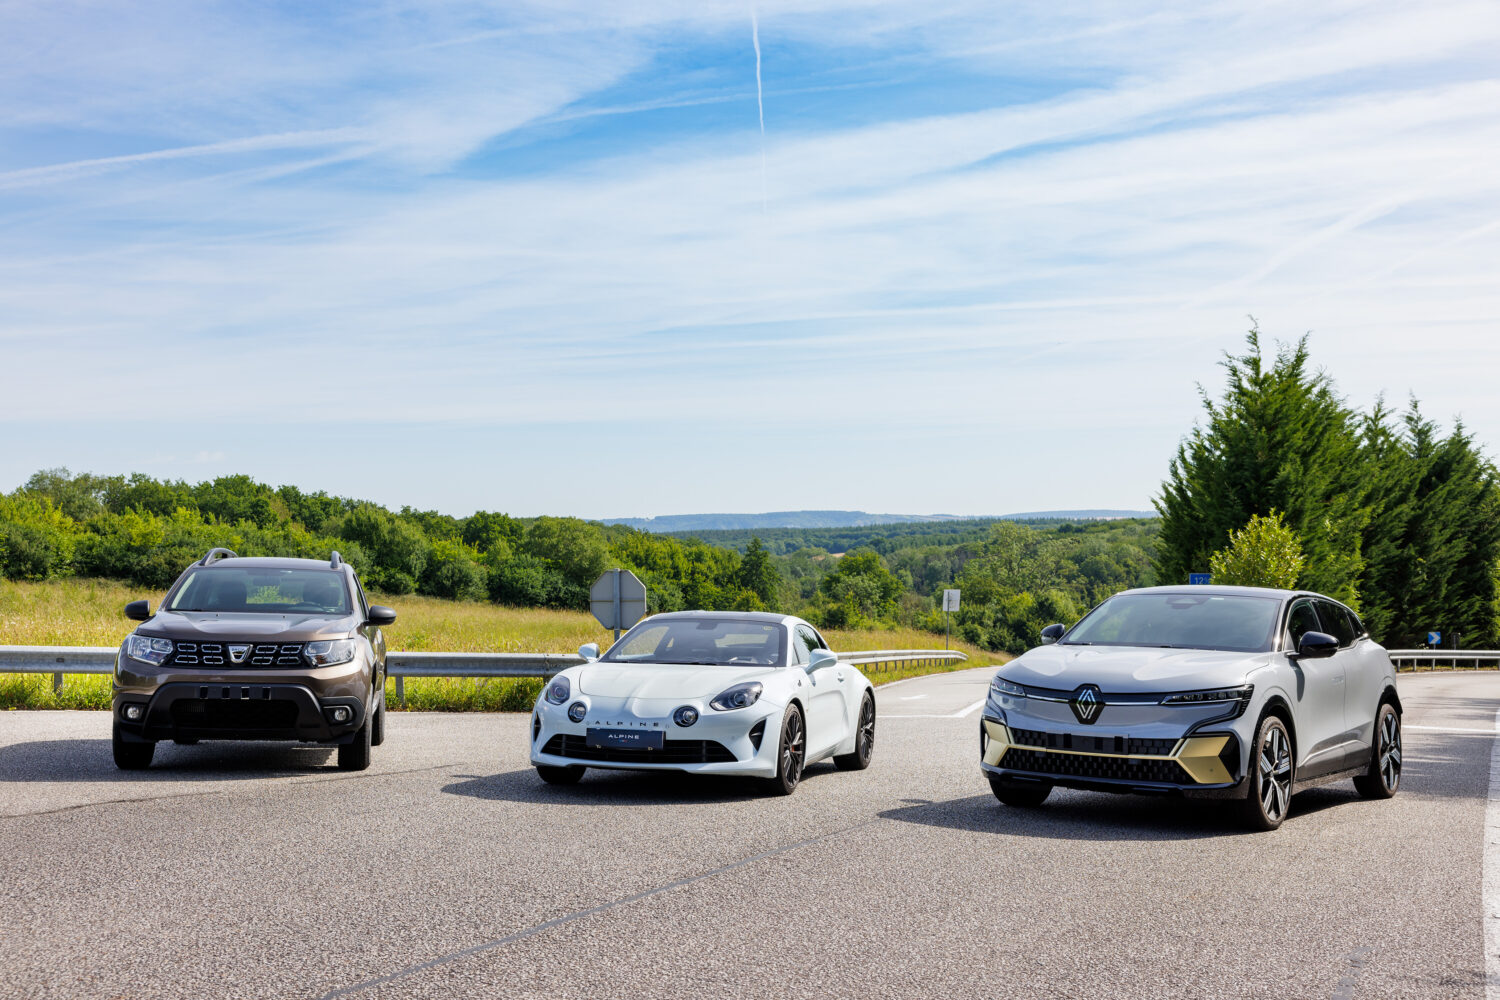 2022 - Story Renault Group - Aubevoye Technical Centre 40 years of passion for cars and stories to tell (4)